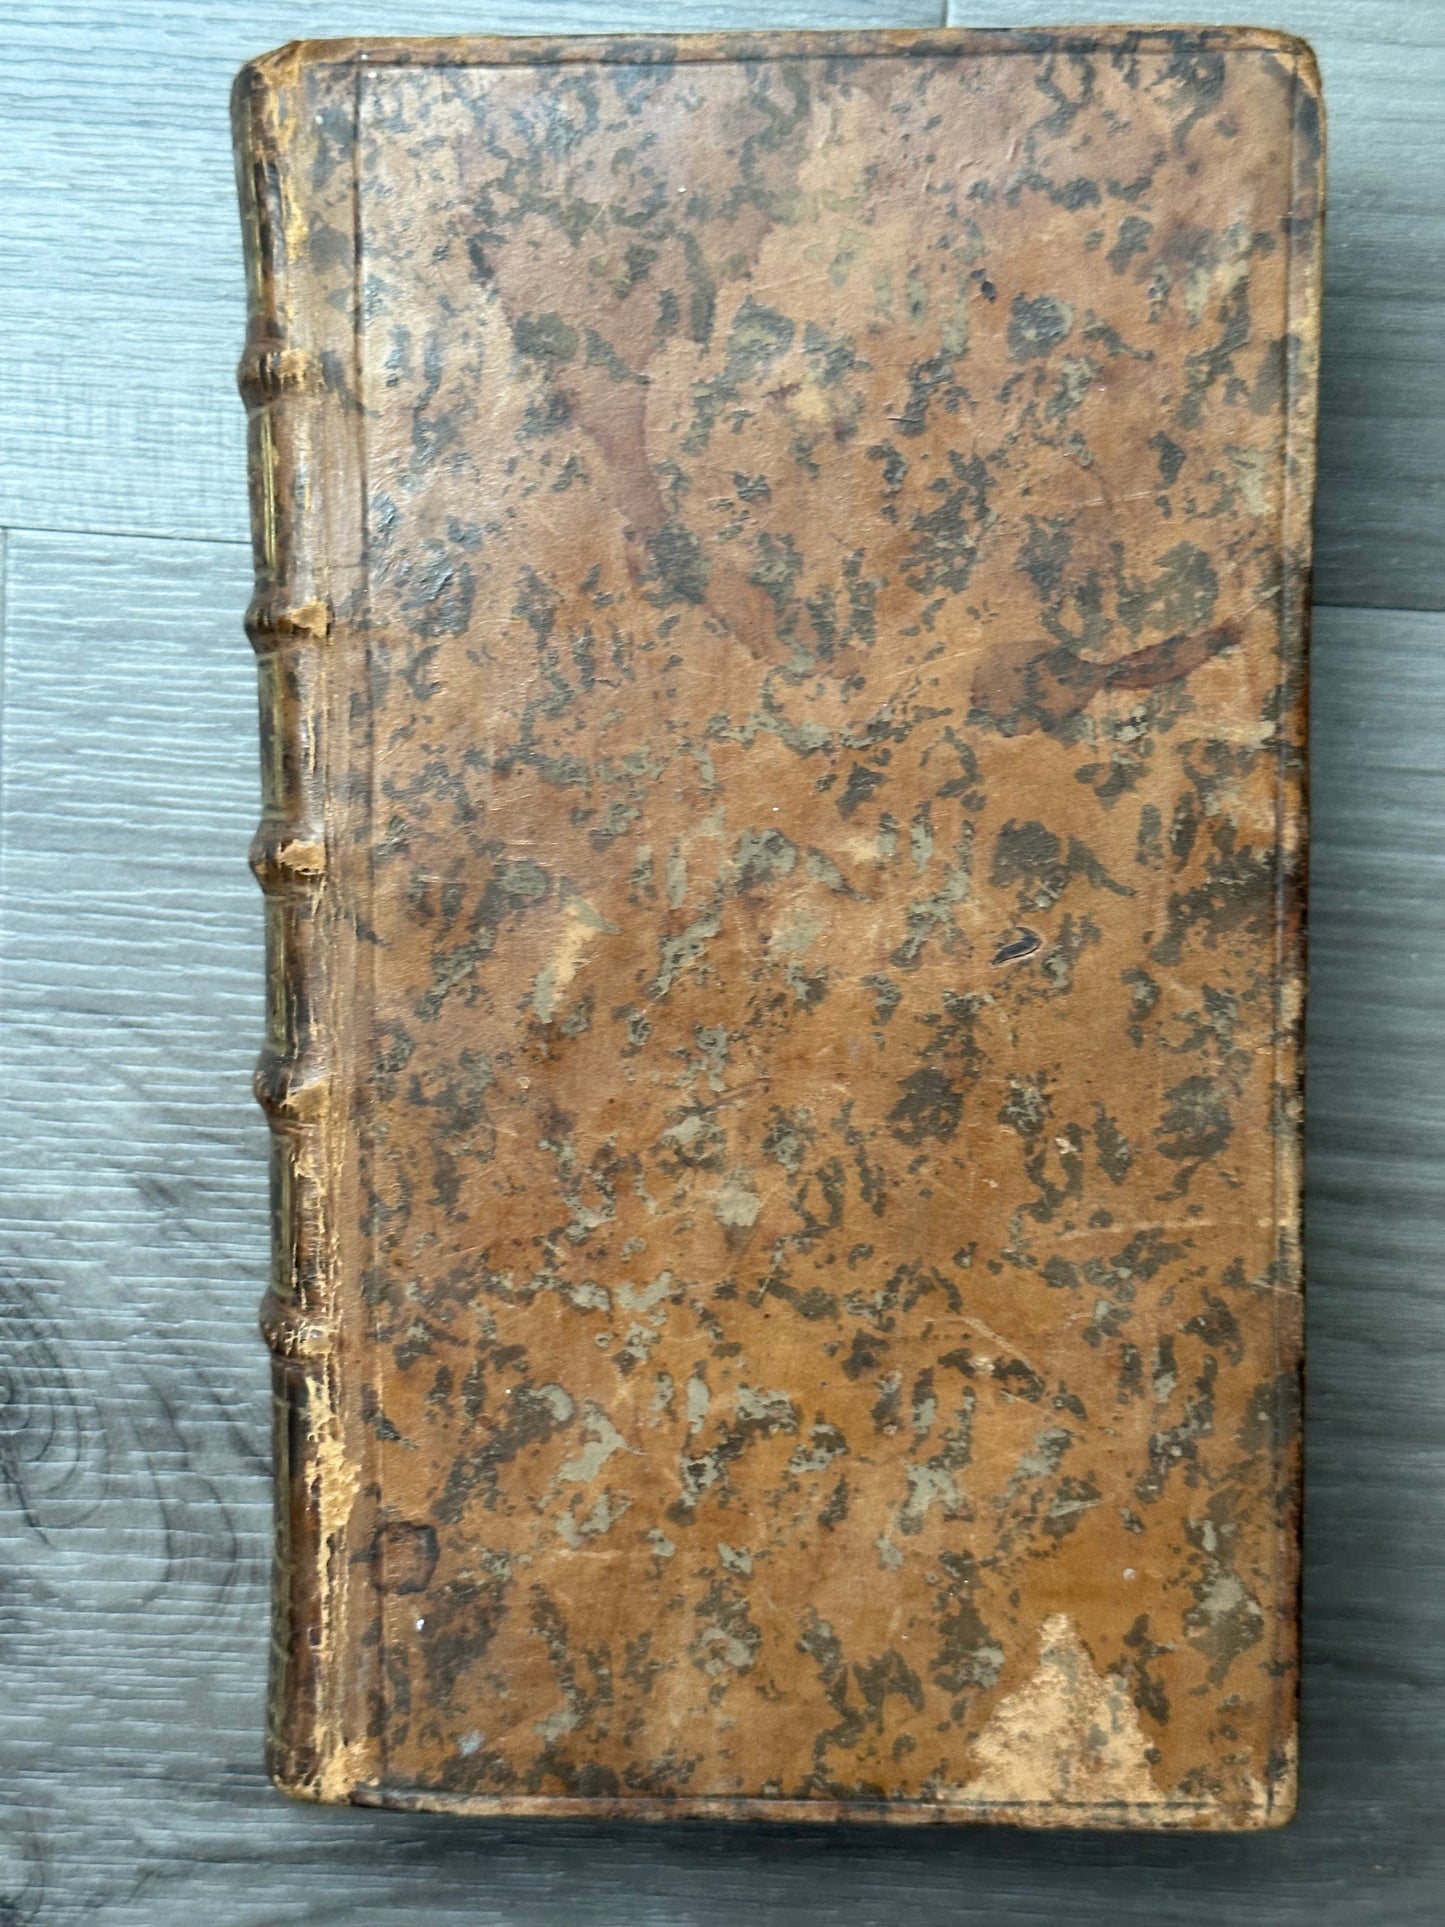 1712 French Religion Book